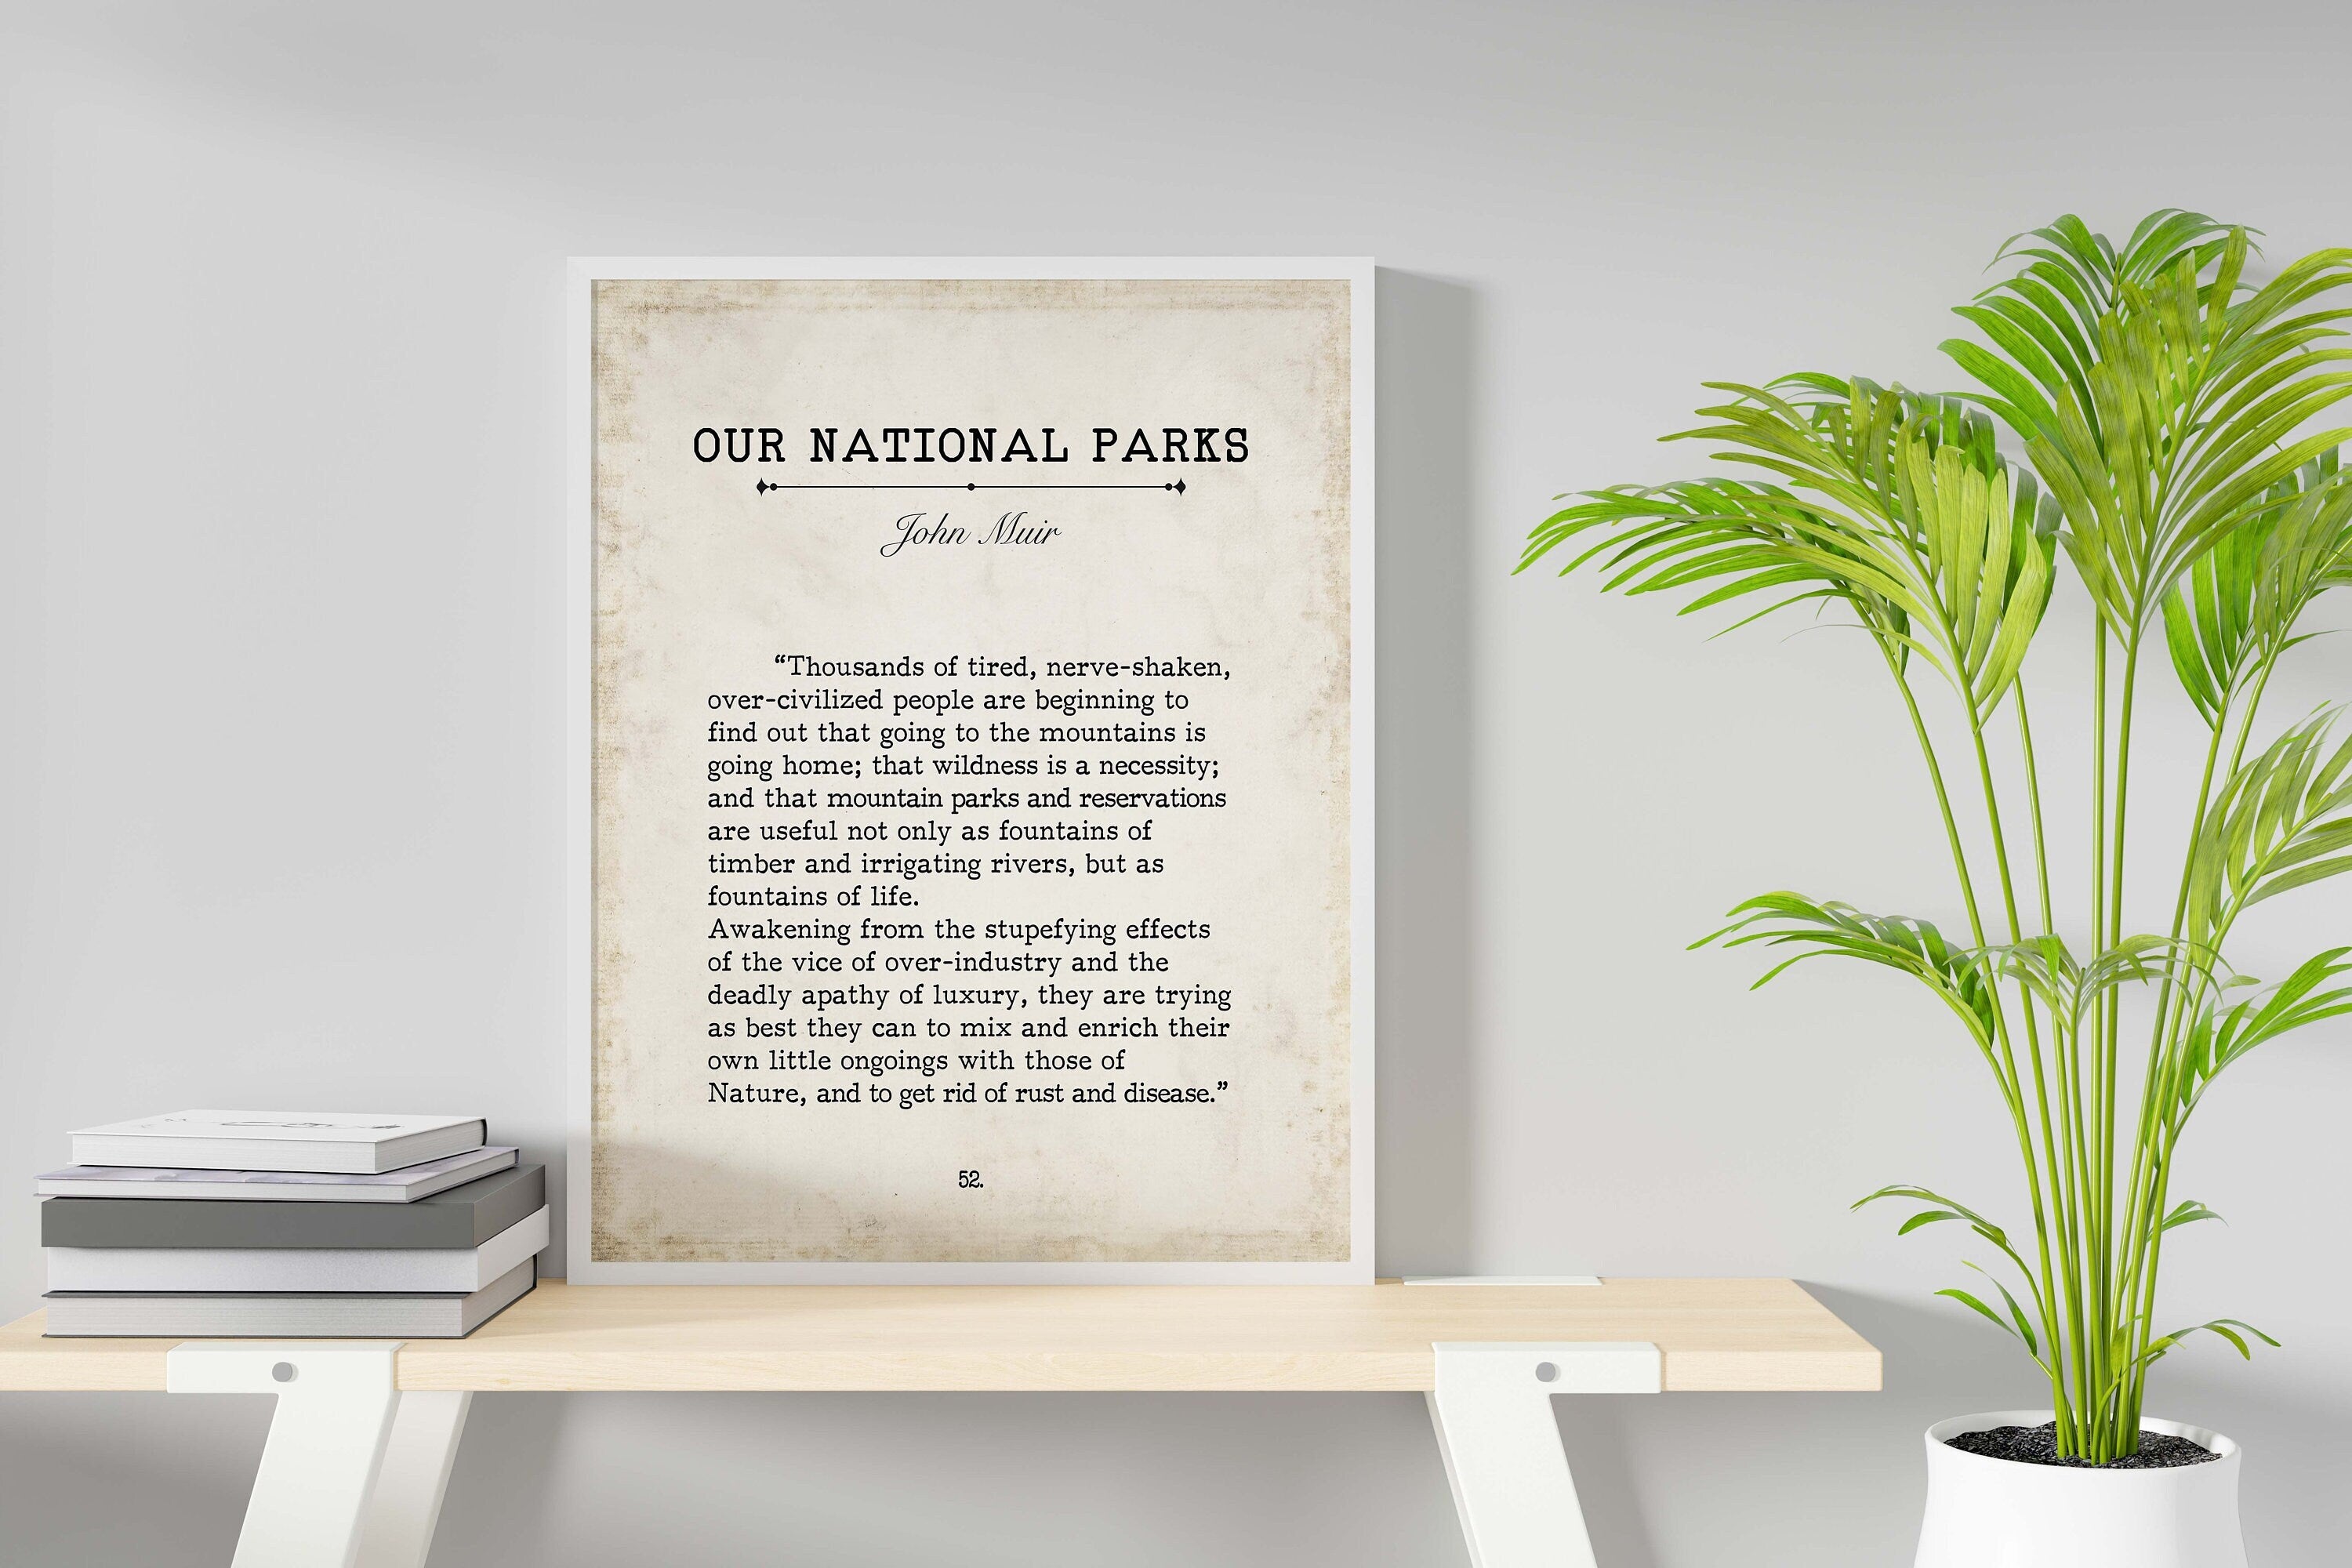 John Muir Book Page Inspirational Wall Art, Our National Parks Quote Vintage Style Print Wall Decor